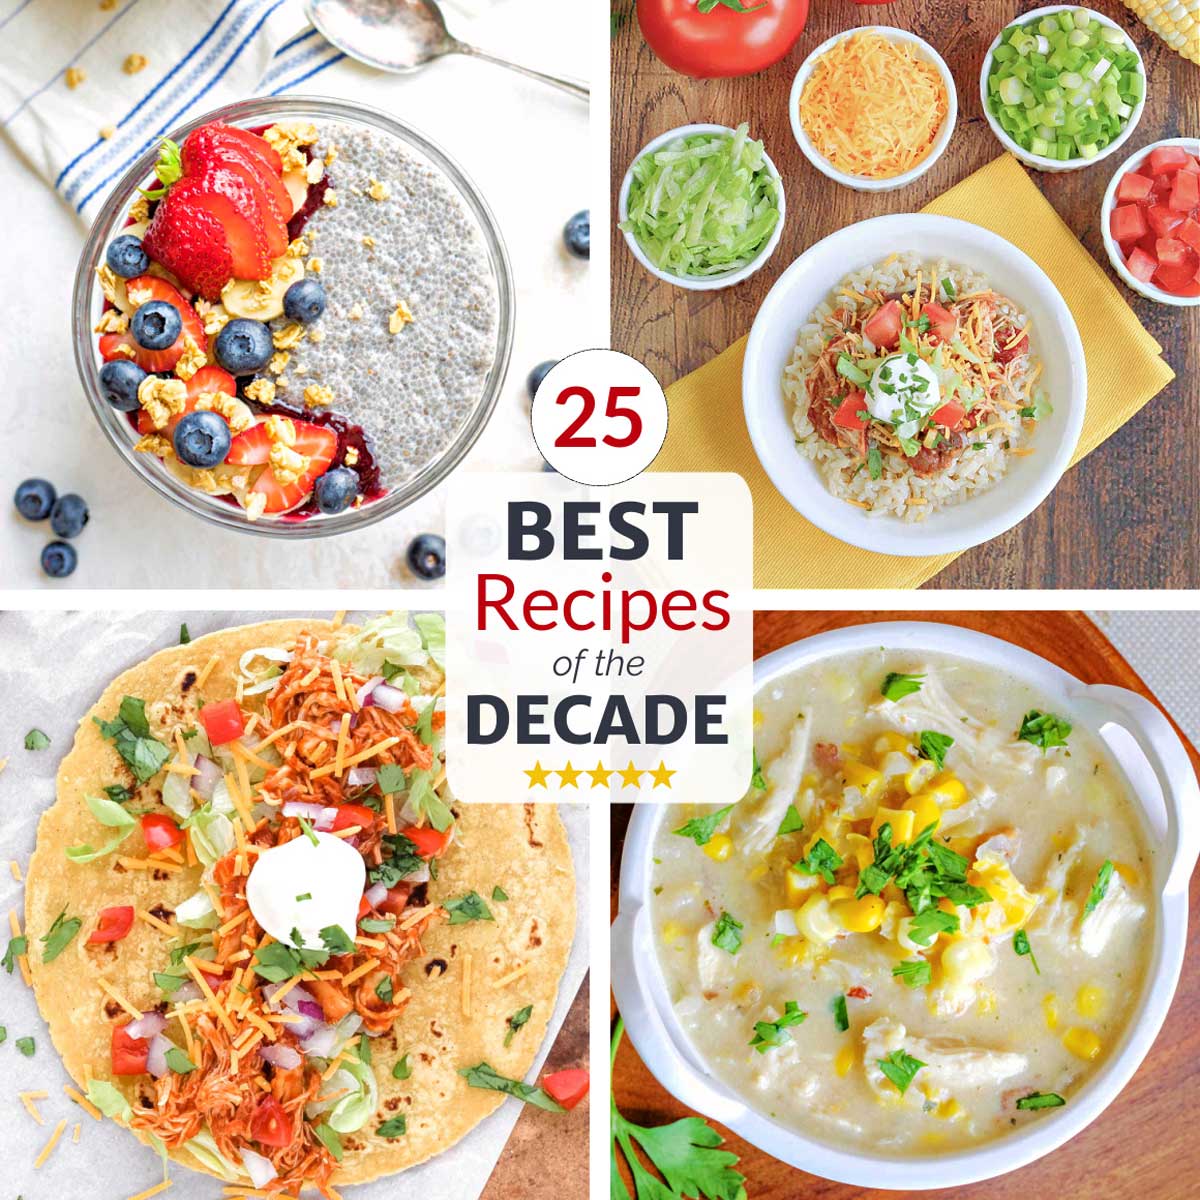 Square collage of four recipes with text overlay "25 Best Recipes of the Decade" with 5 little gold stars.